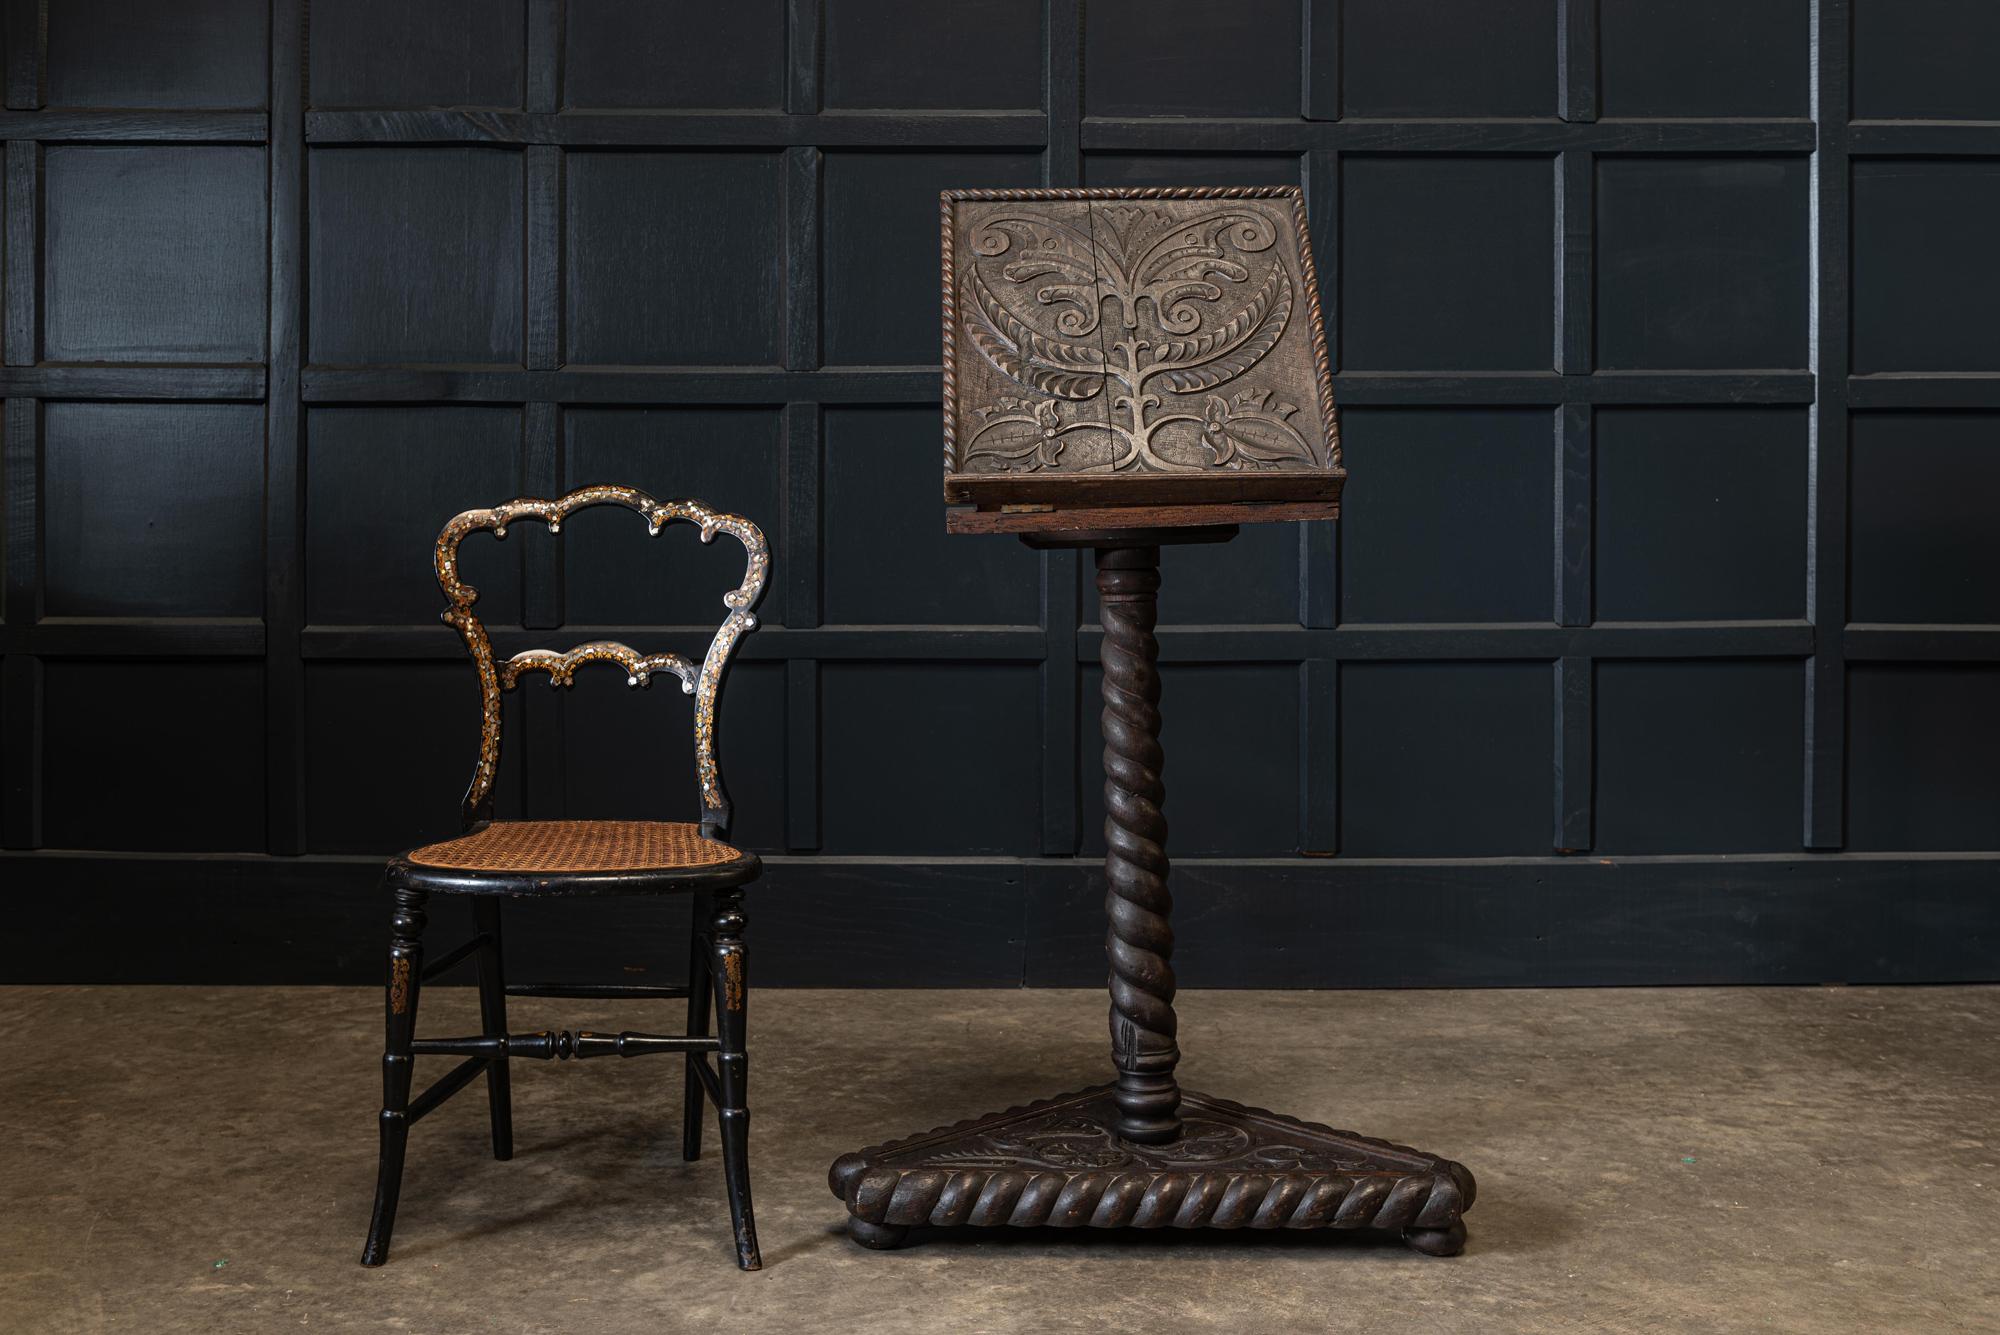 19th century English carved oak bible reading stand,
circa 1870.

Carved oak reading stand with adjustable and rotating top mounted on a bobbin turned pedestal.

Measures: Closed H 80 x W 40 (top) x D 41cm
Base W 67cm.
Lid open 110cm